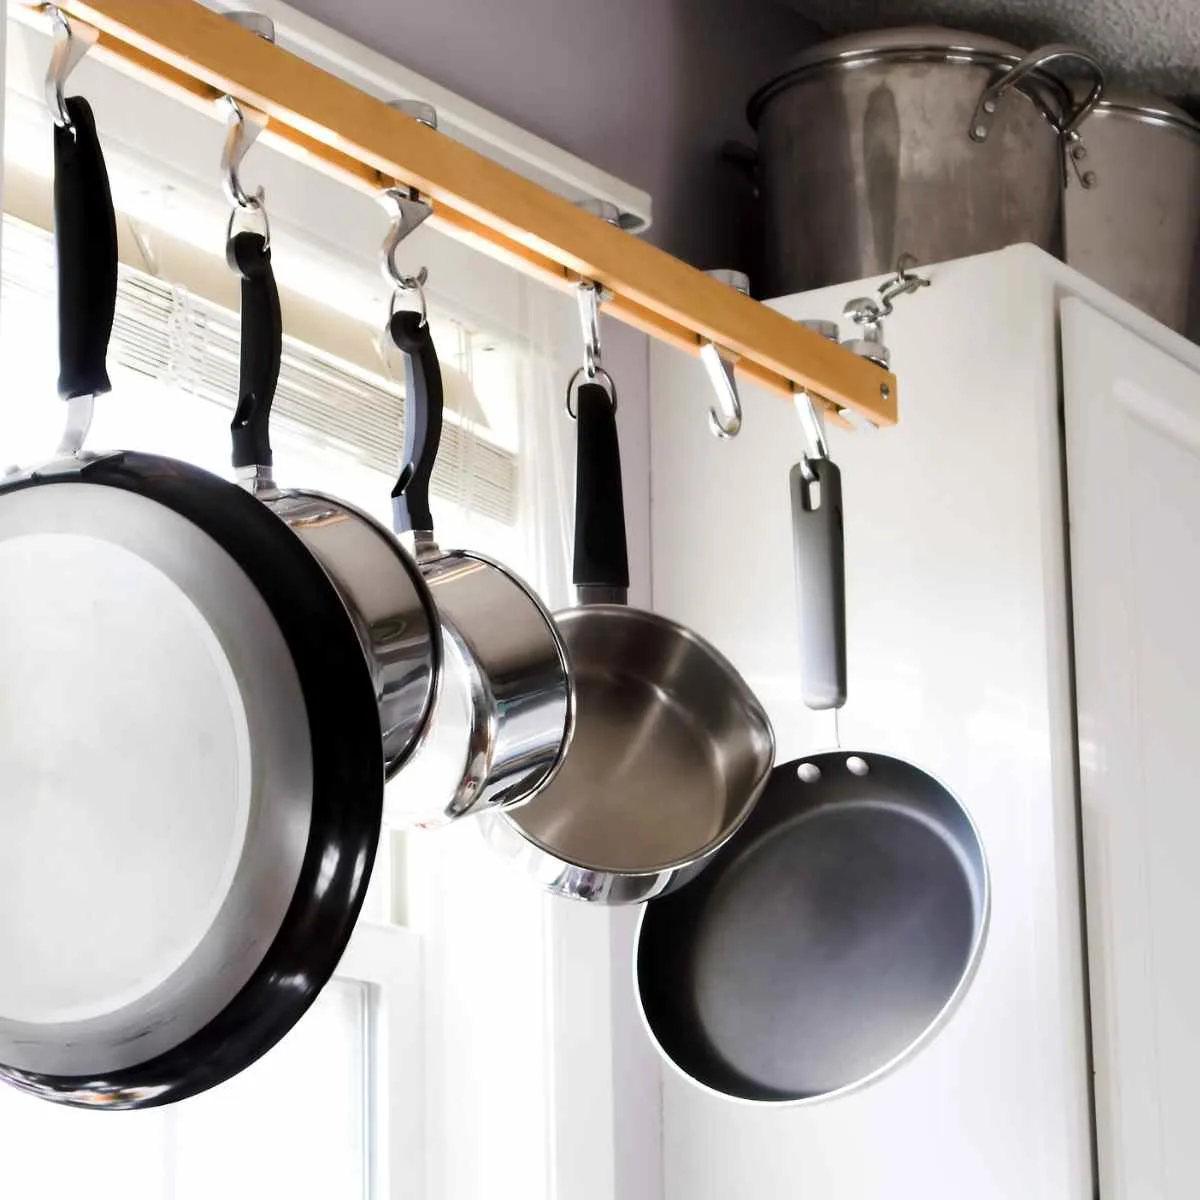 Diffrent types of non-toxic cookware hanging in the kitchen.